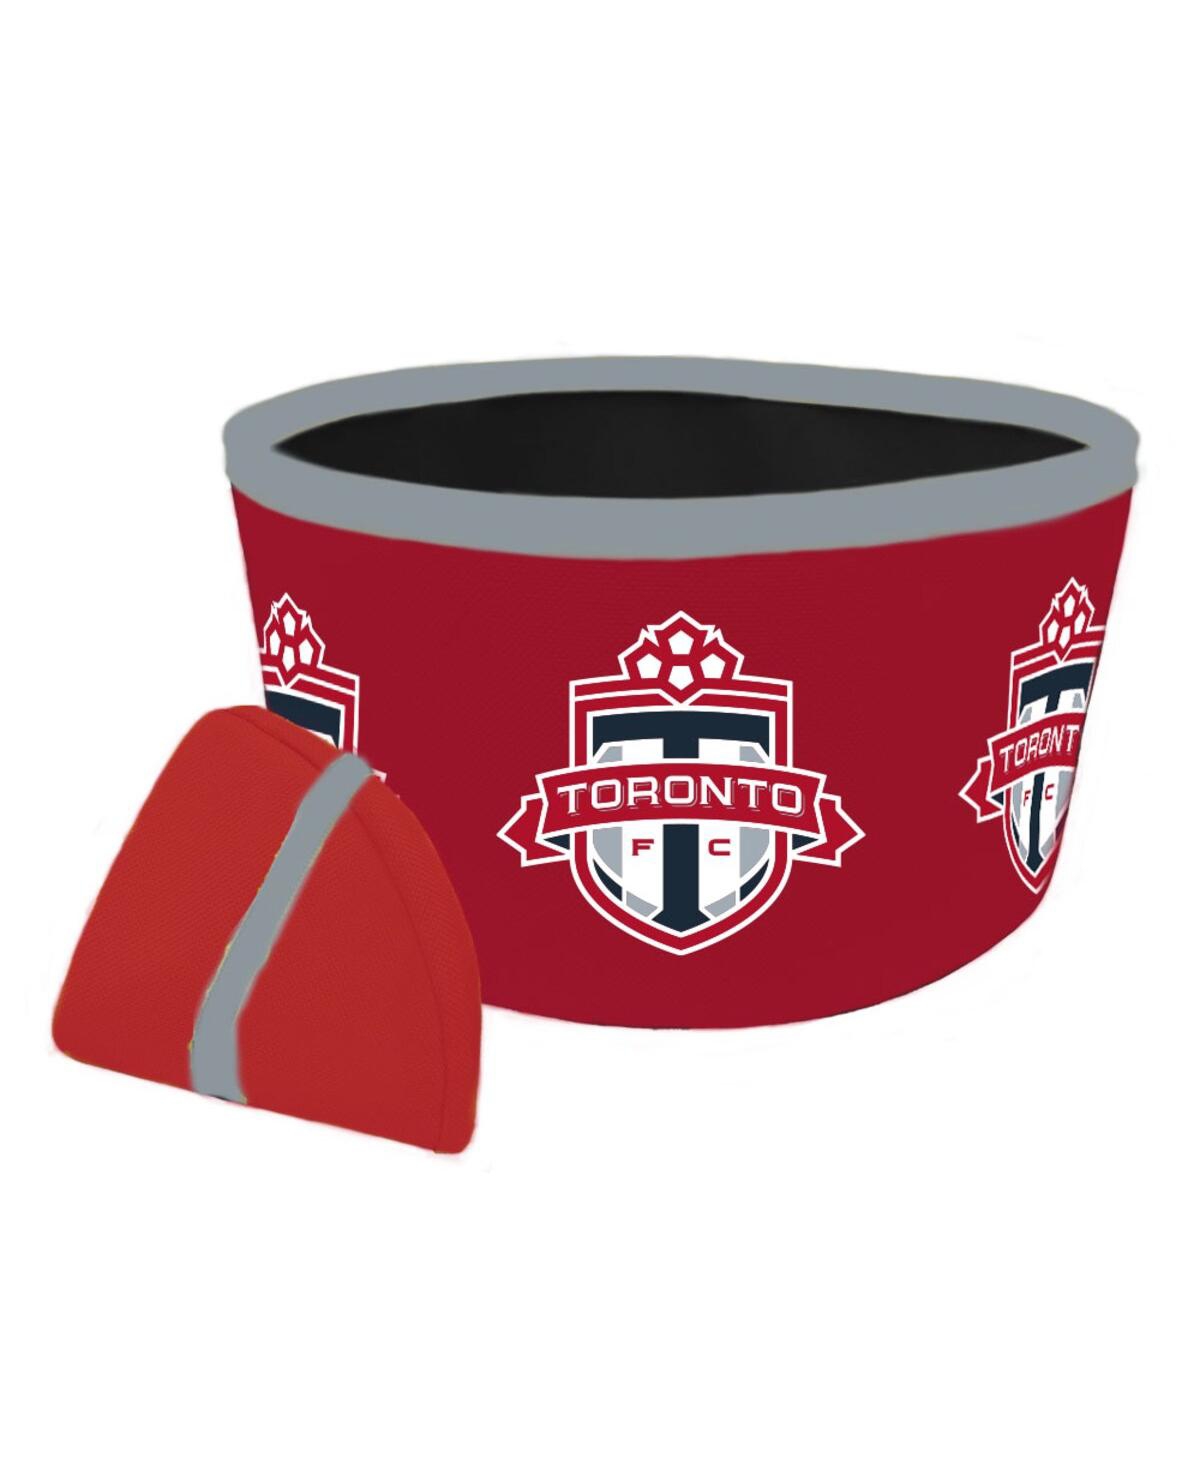 Toronto Fc Collapsible Travel Dog Bowl - Red